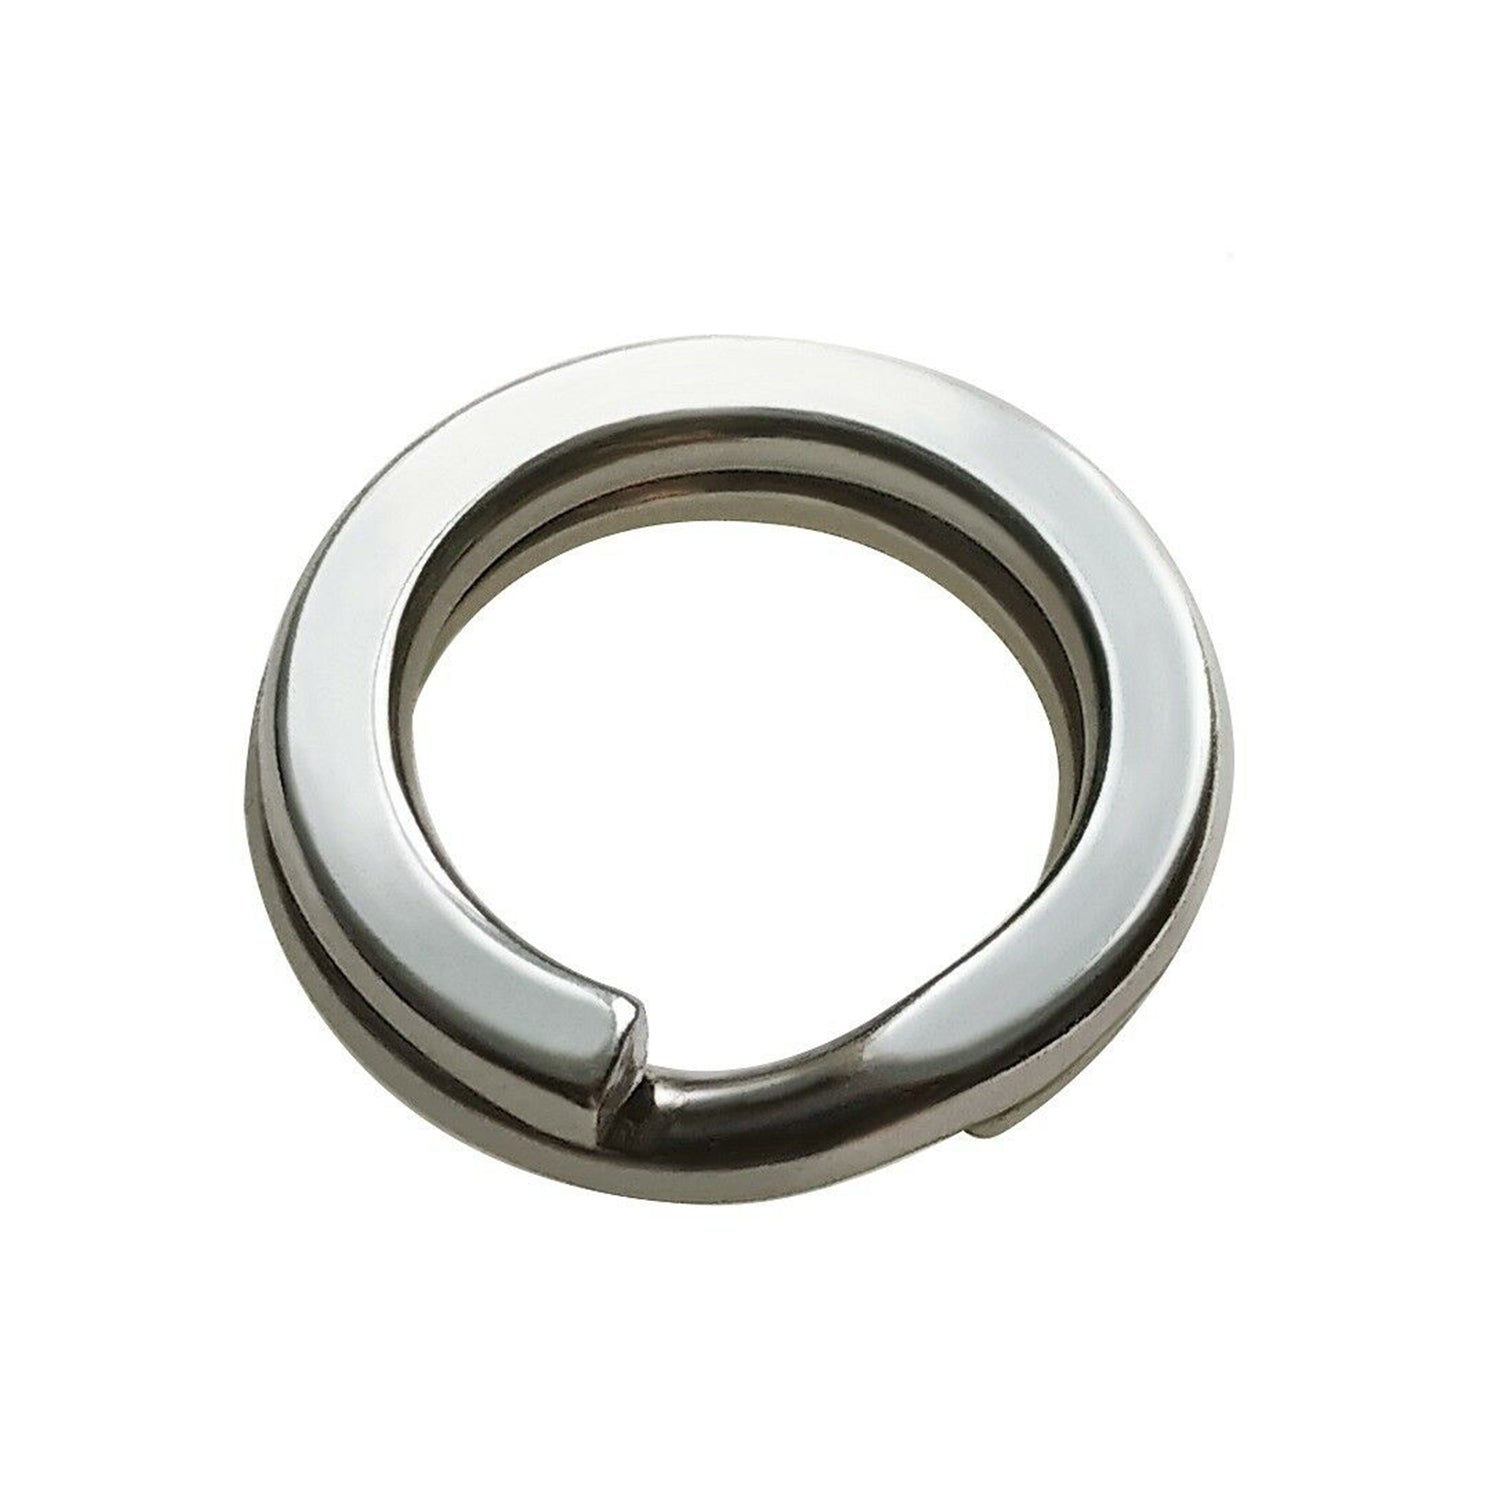 50pcs/lot Stainless Steel Split Ring Diameter 4mm to 8mm Heavy Duty Fishing  Double Ring Connector Fishing Accessories Fish Box